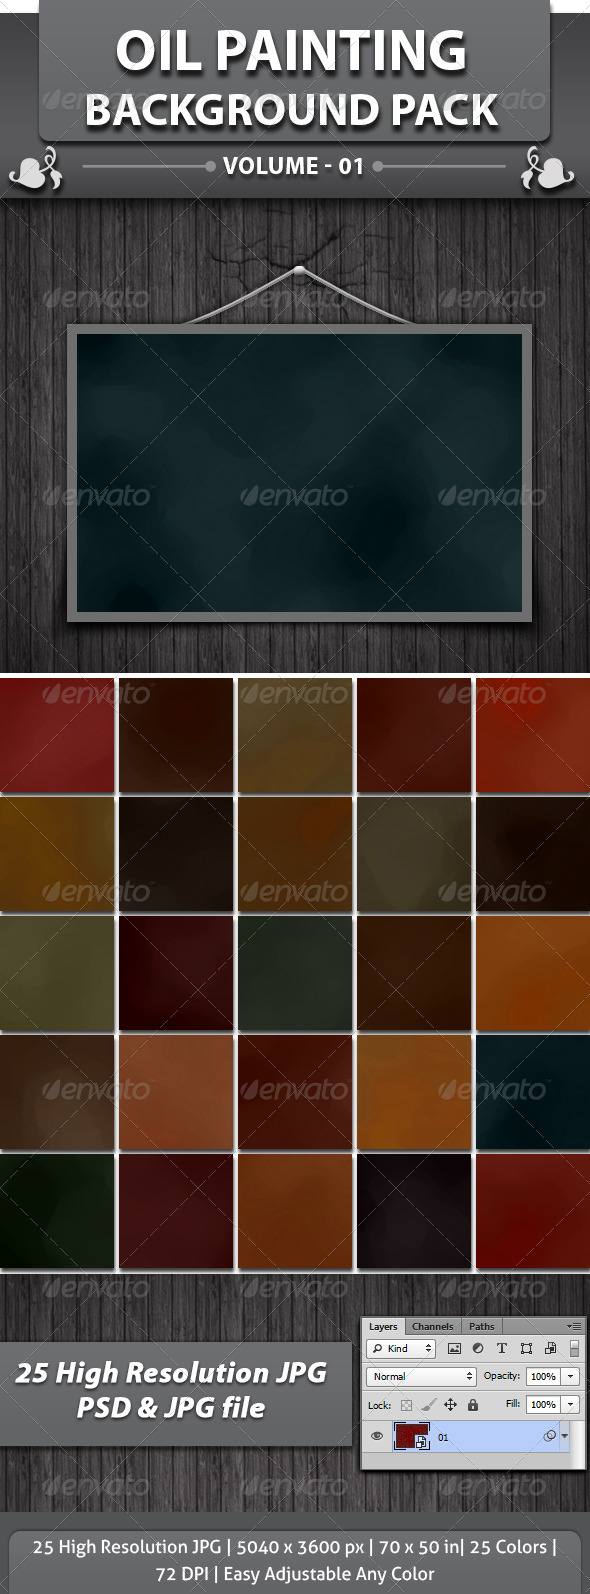 25 Oil Painting Background Pack